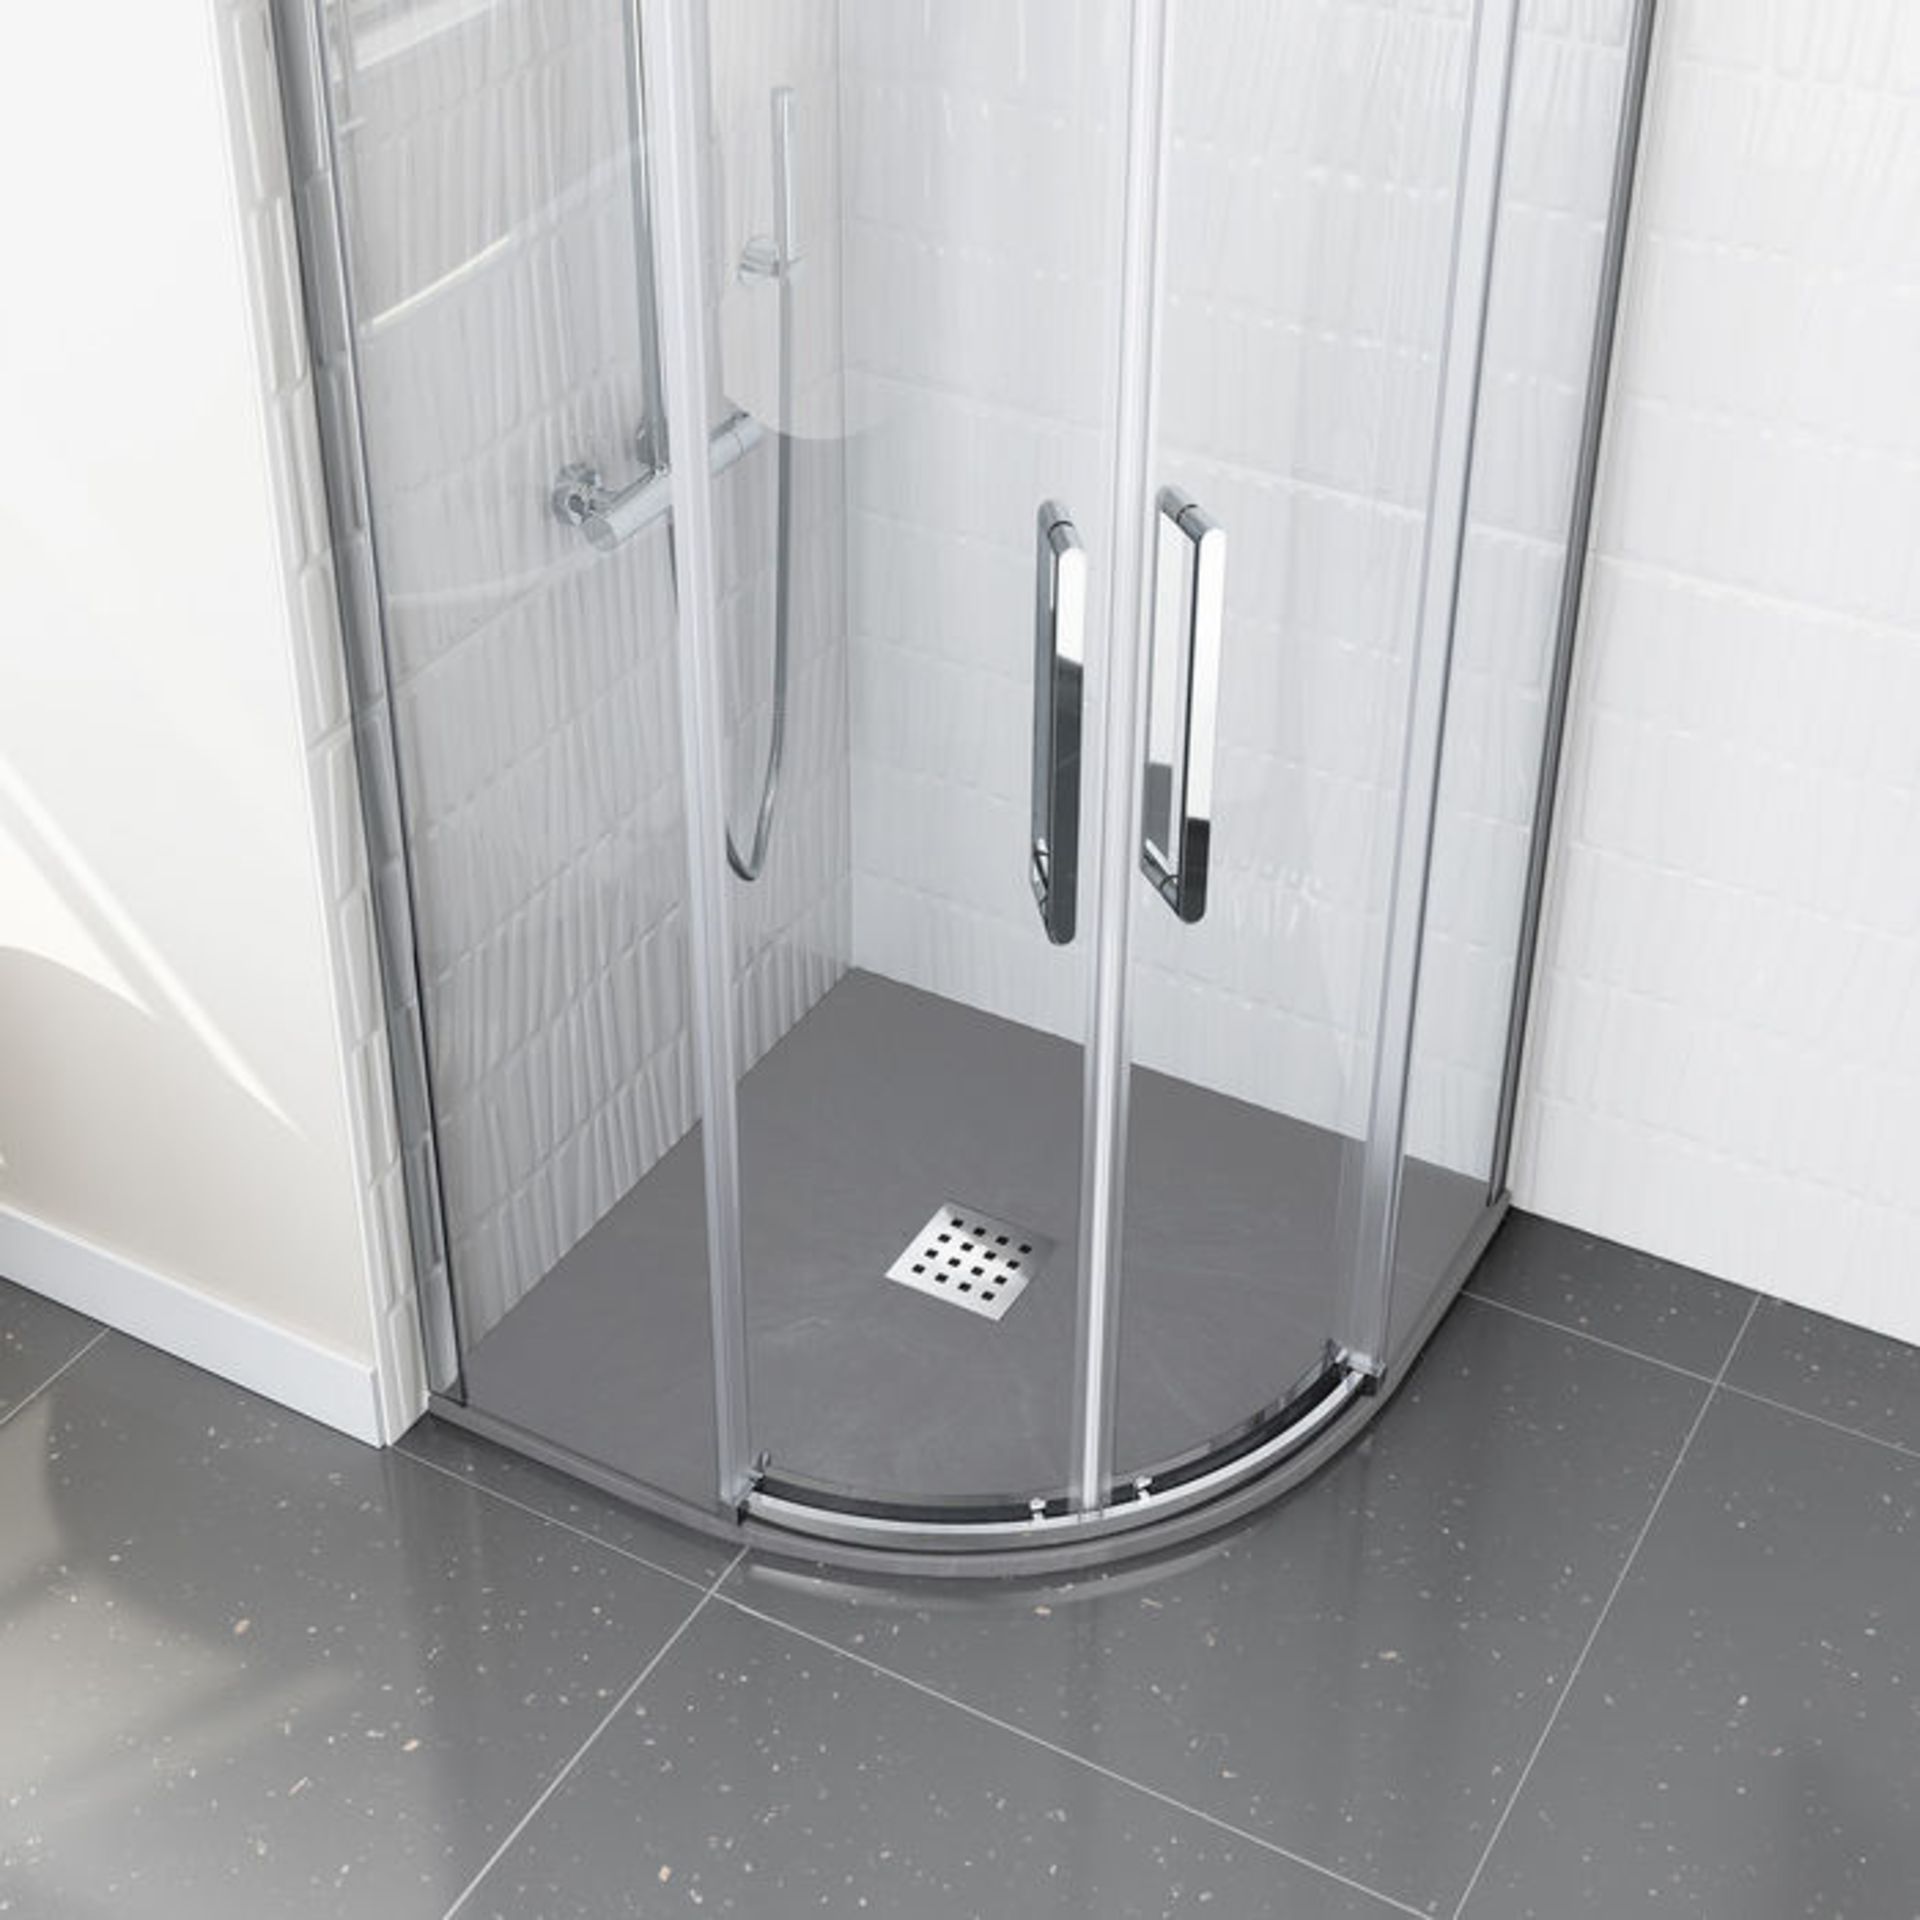 (CS114) 900x900mm Quadrant Slate Effect Shower Tray in Grey & Chrome Waste. RRP £153.99. - Image 3 of 3